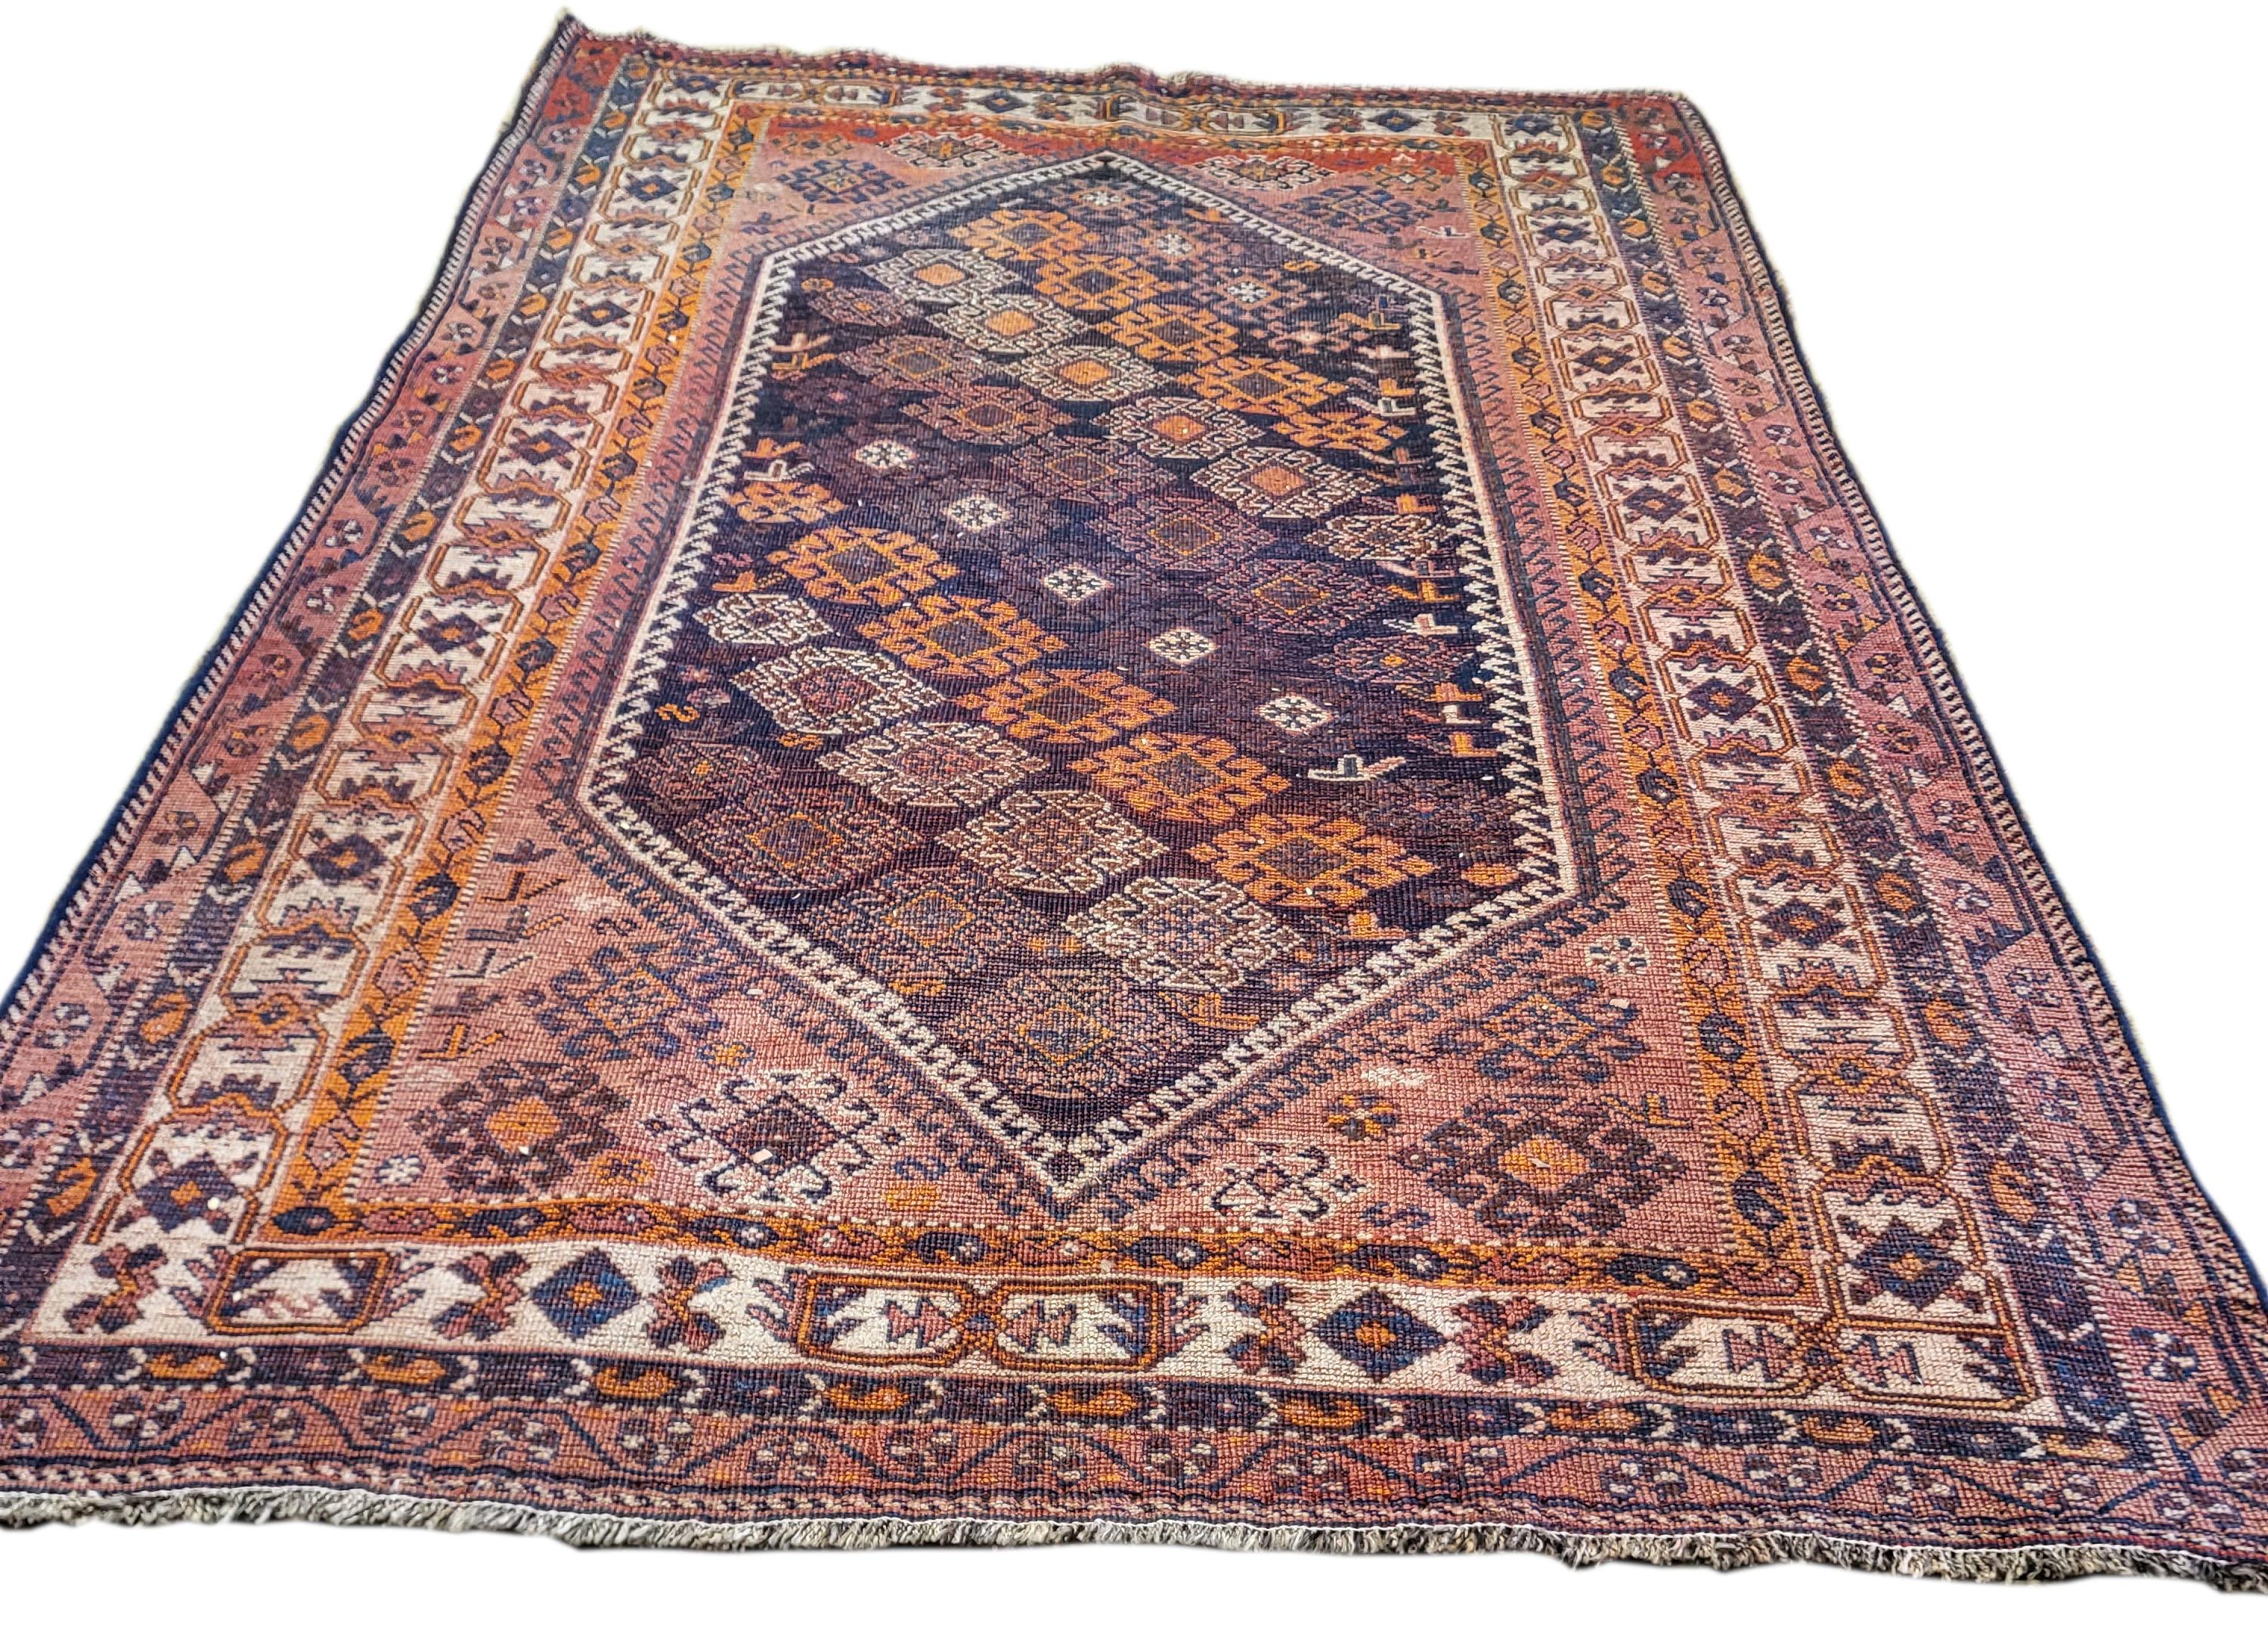 Hand-Knotted 5'x8' Antique Lori - Nomadic / Tribal Persian Rug - Rust & Navy For Sale